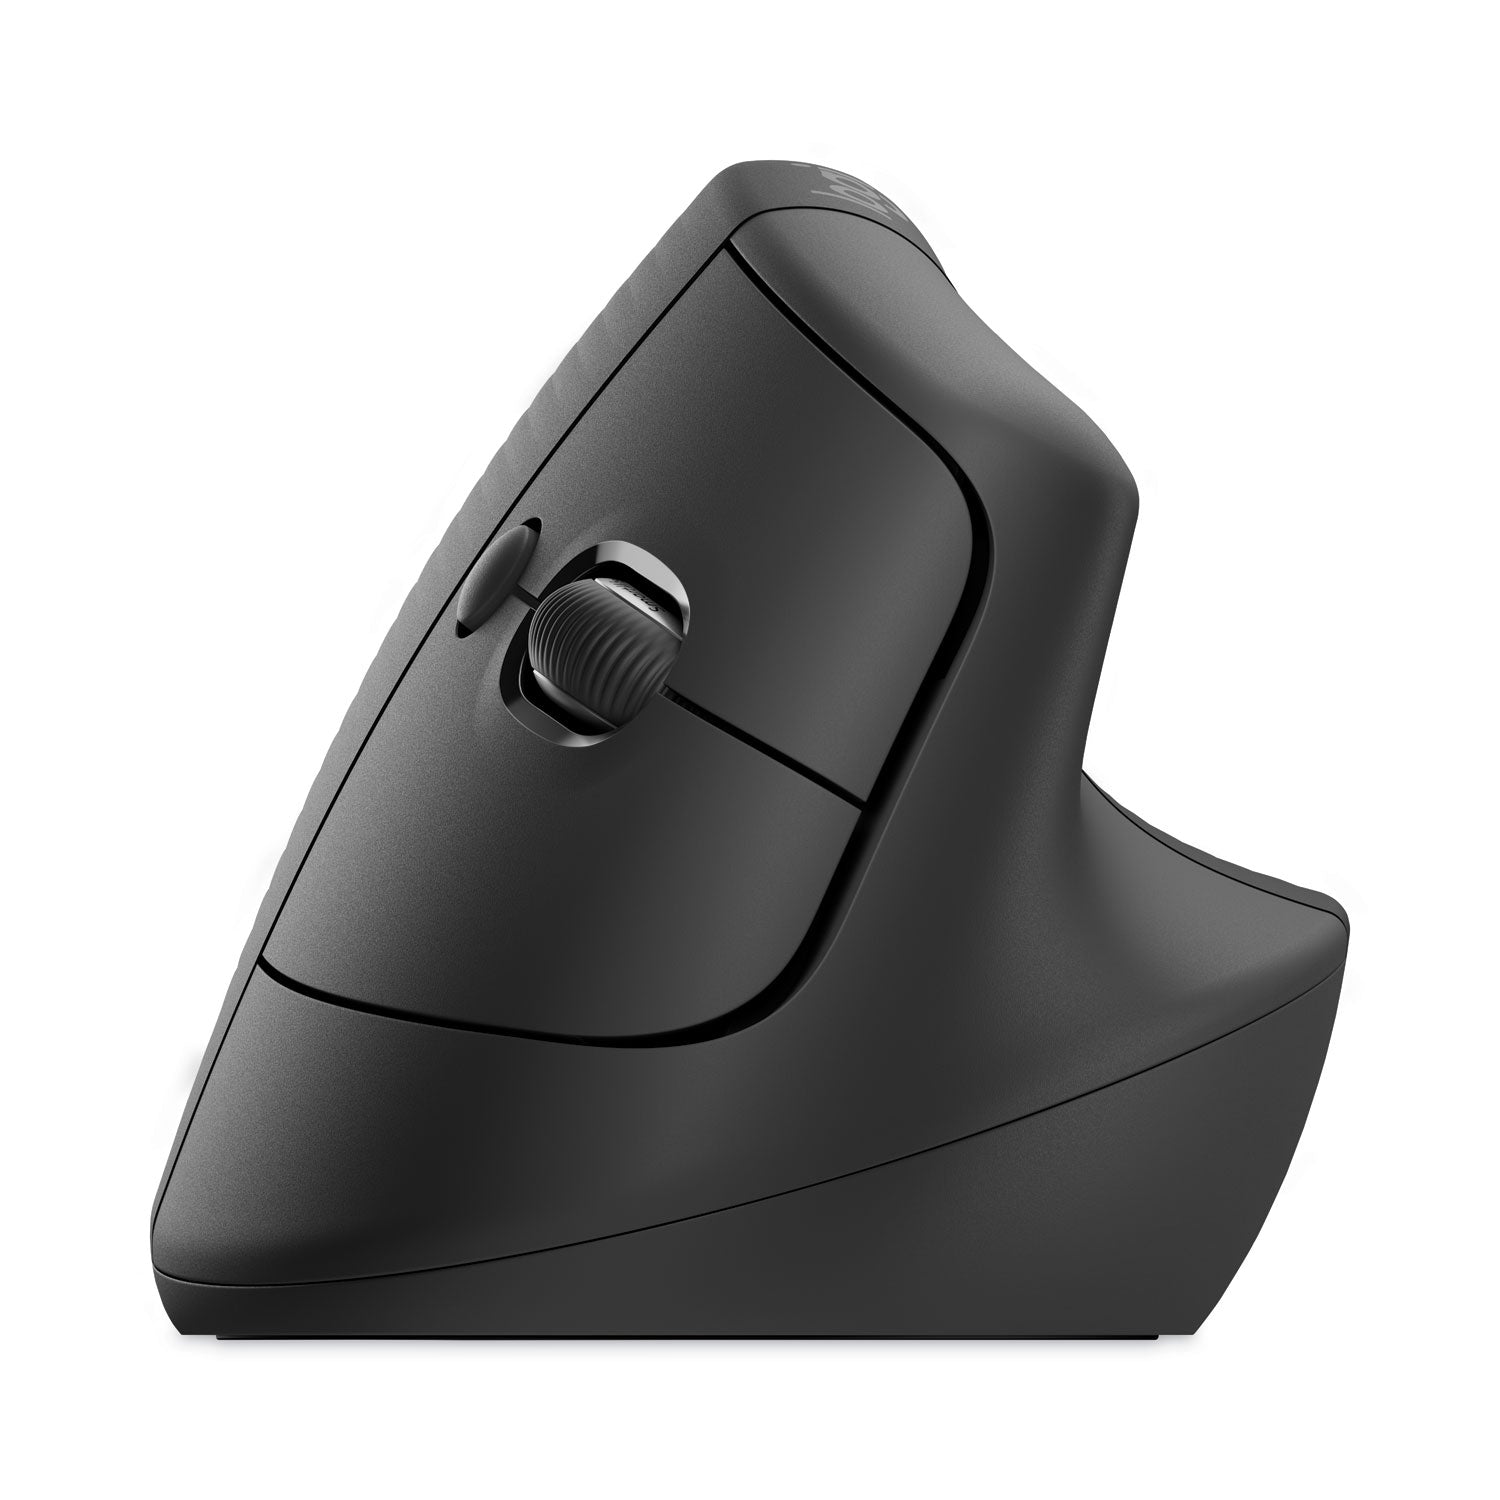 lift-vertical-ergonomic-mouse-24-ghz-frequency-32-ft-wireless-range-right-hand-use-graphite_log910006466 - 3